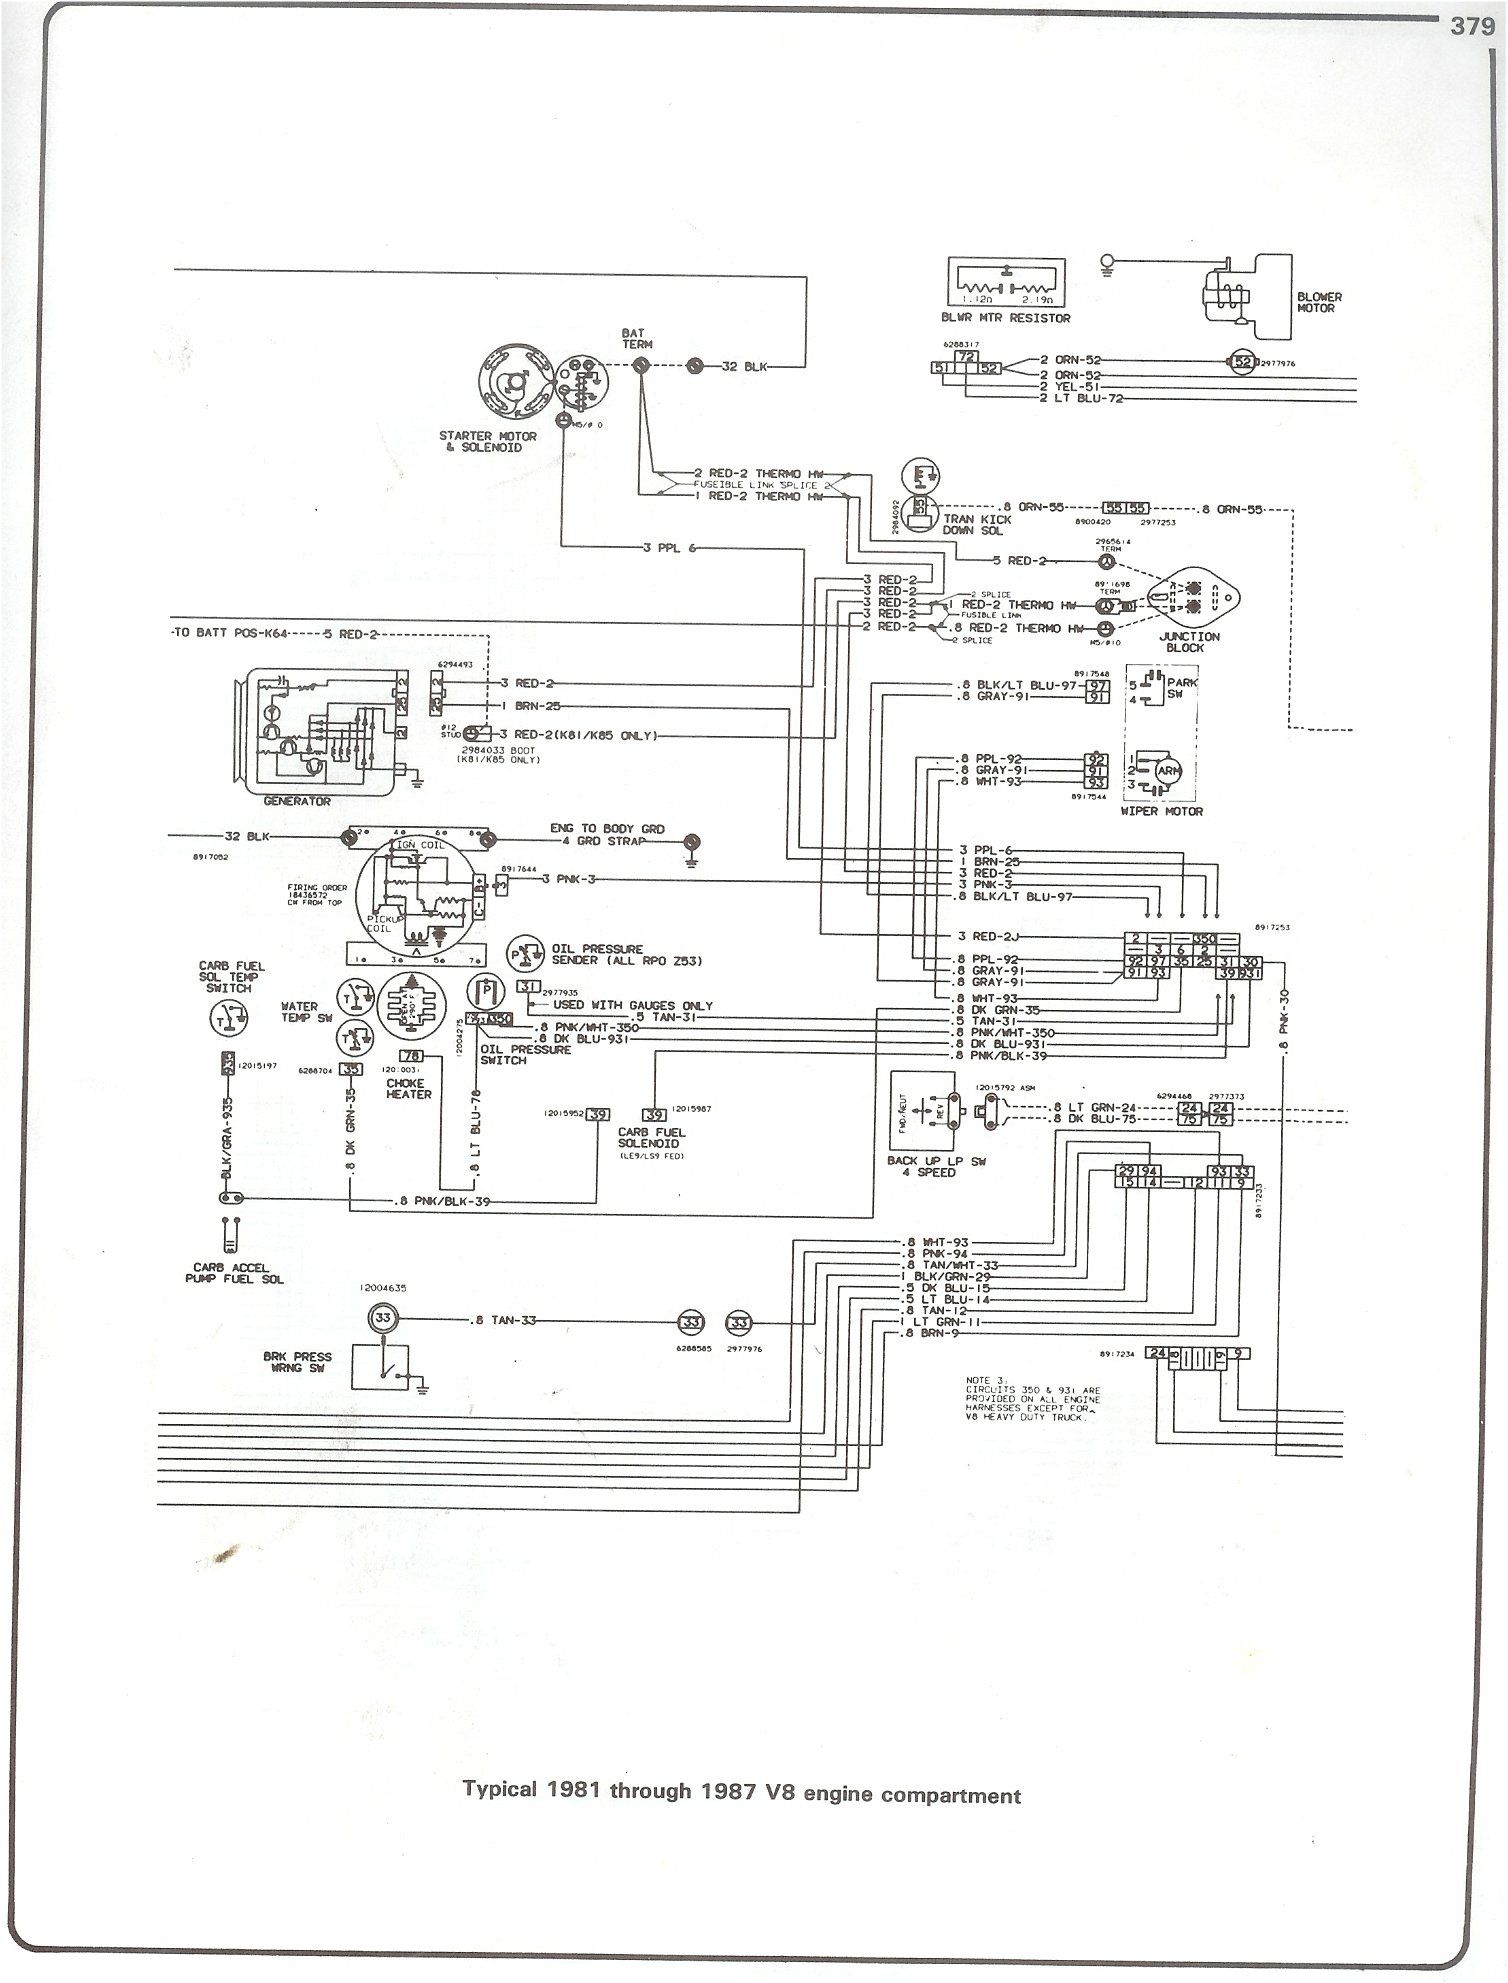 73-87 Chevy Truck Air Conditioning Wiring Diagram